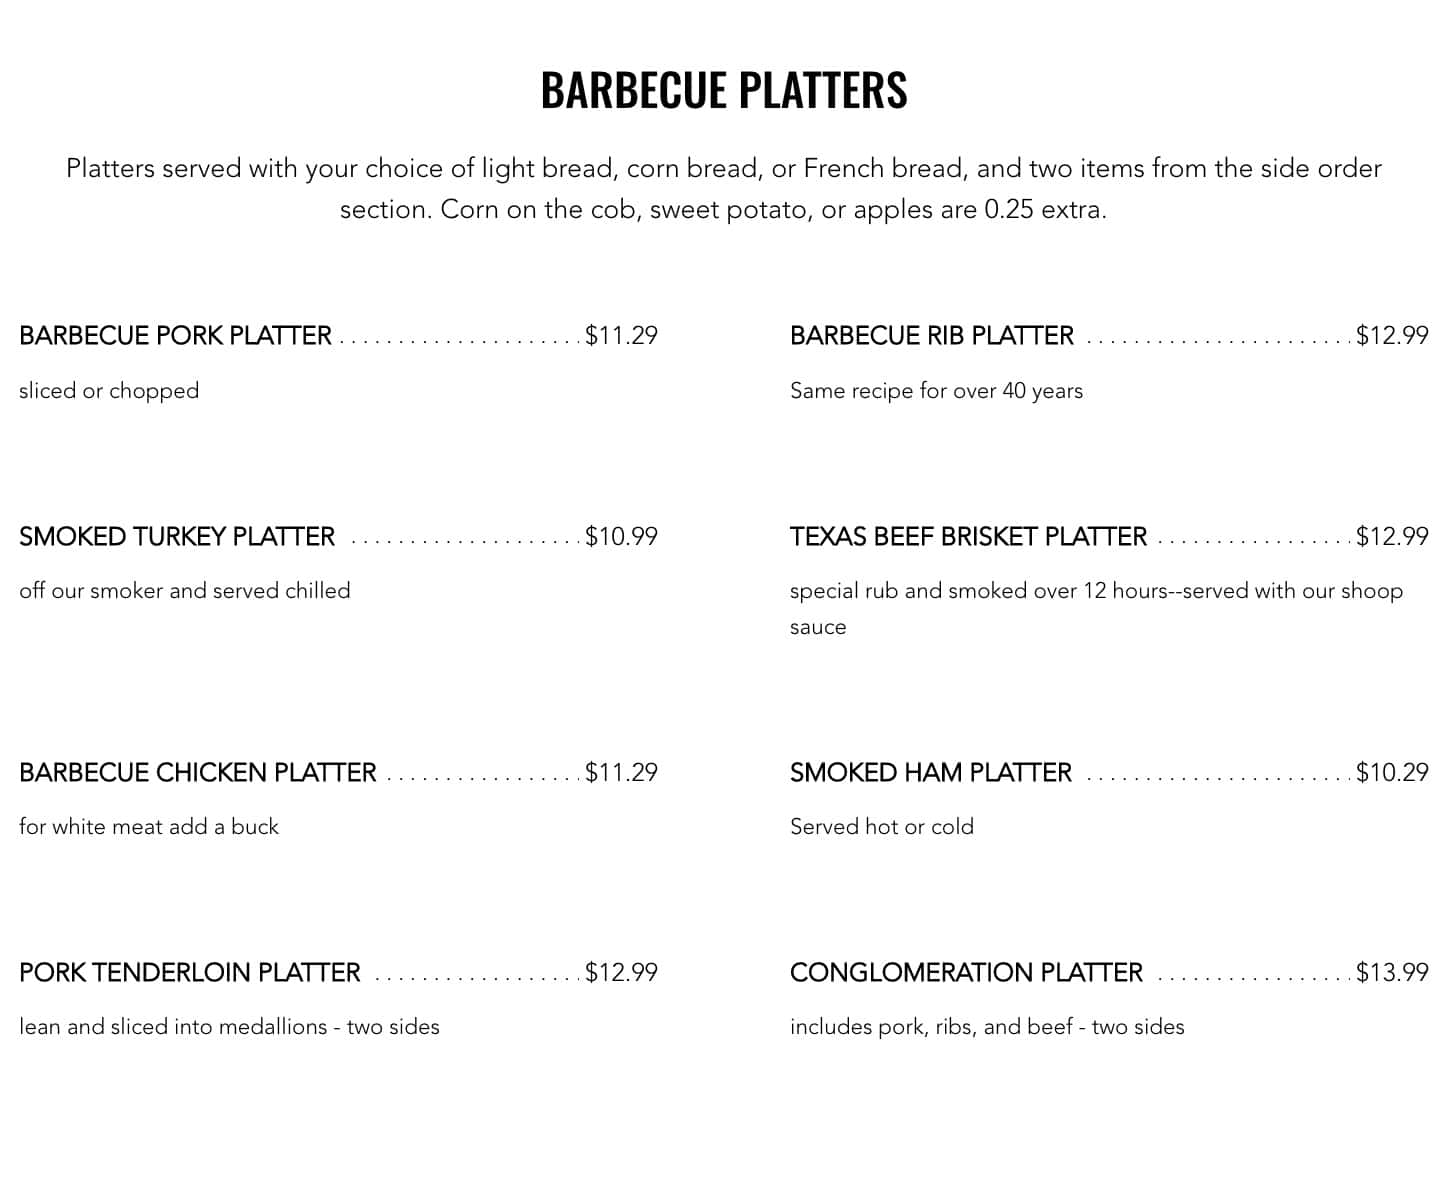 Country's Barbecue Platters Menu